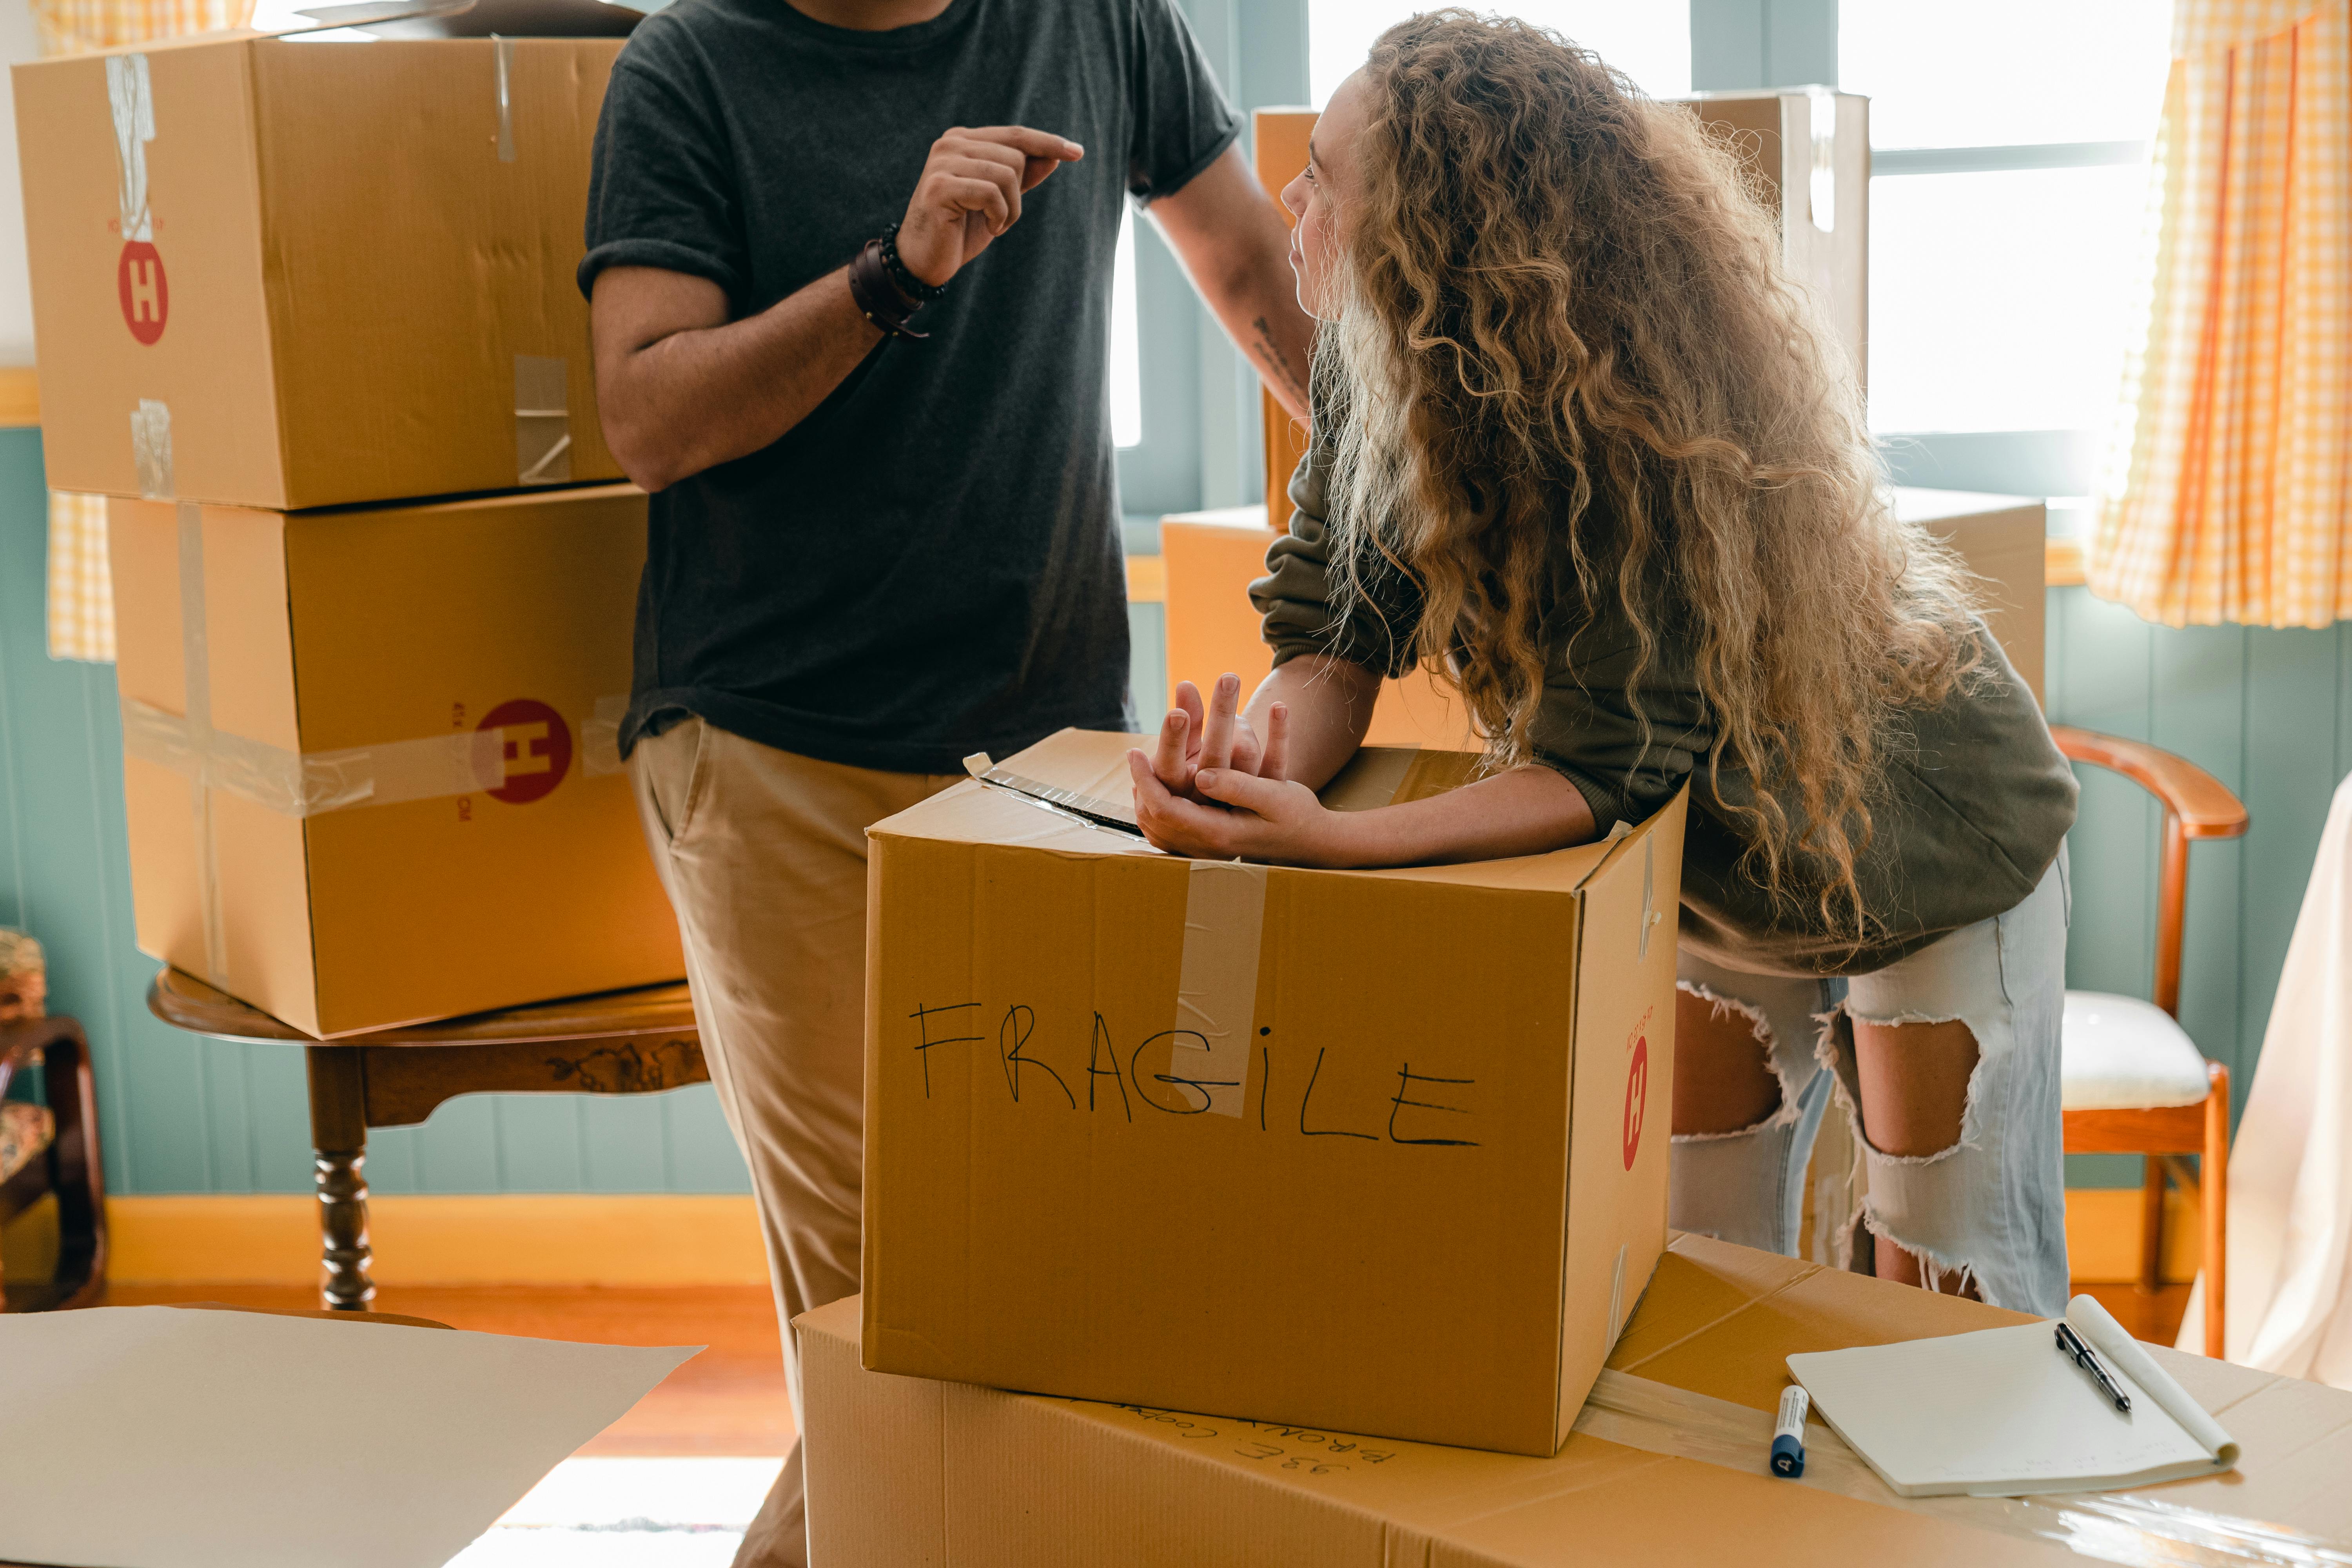 Couple moving into a new apartment | Source: Pexels